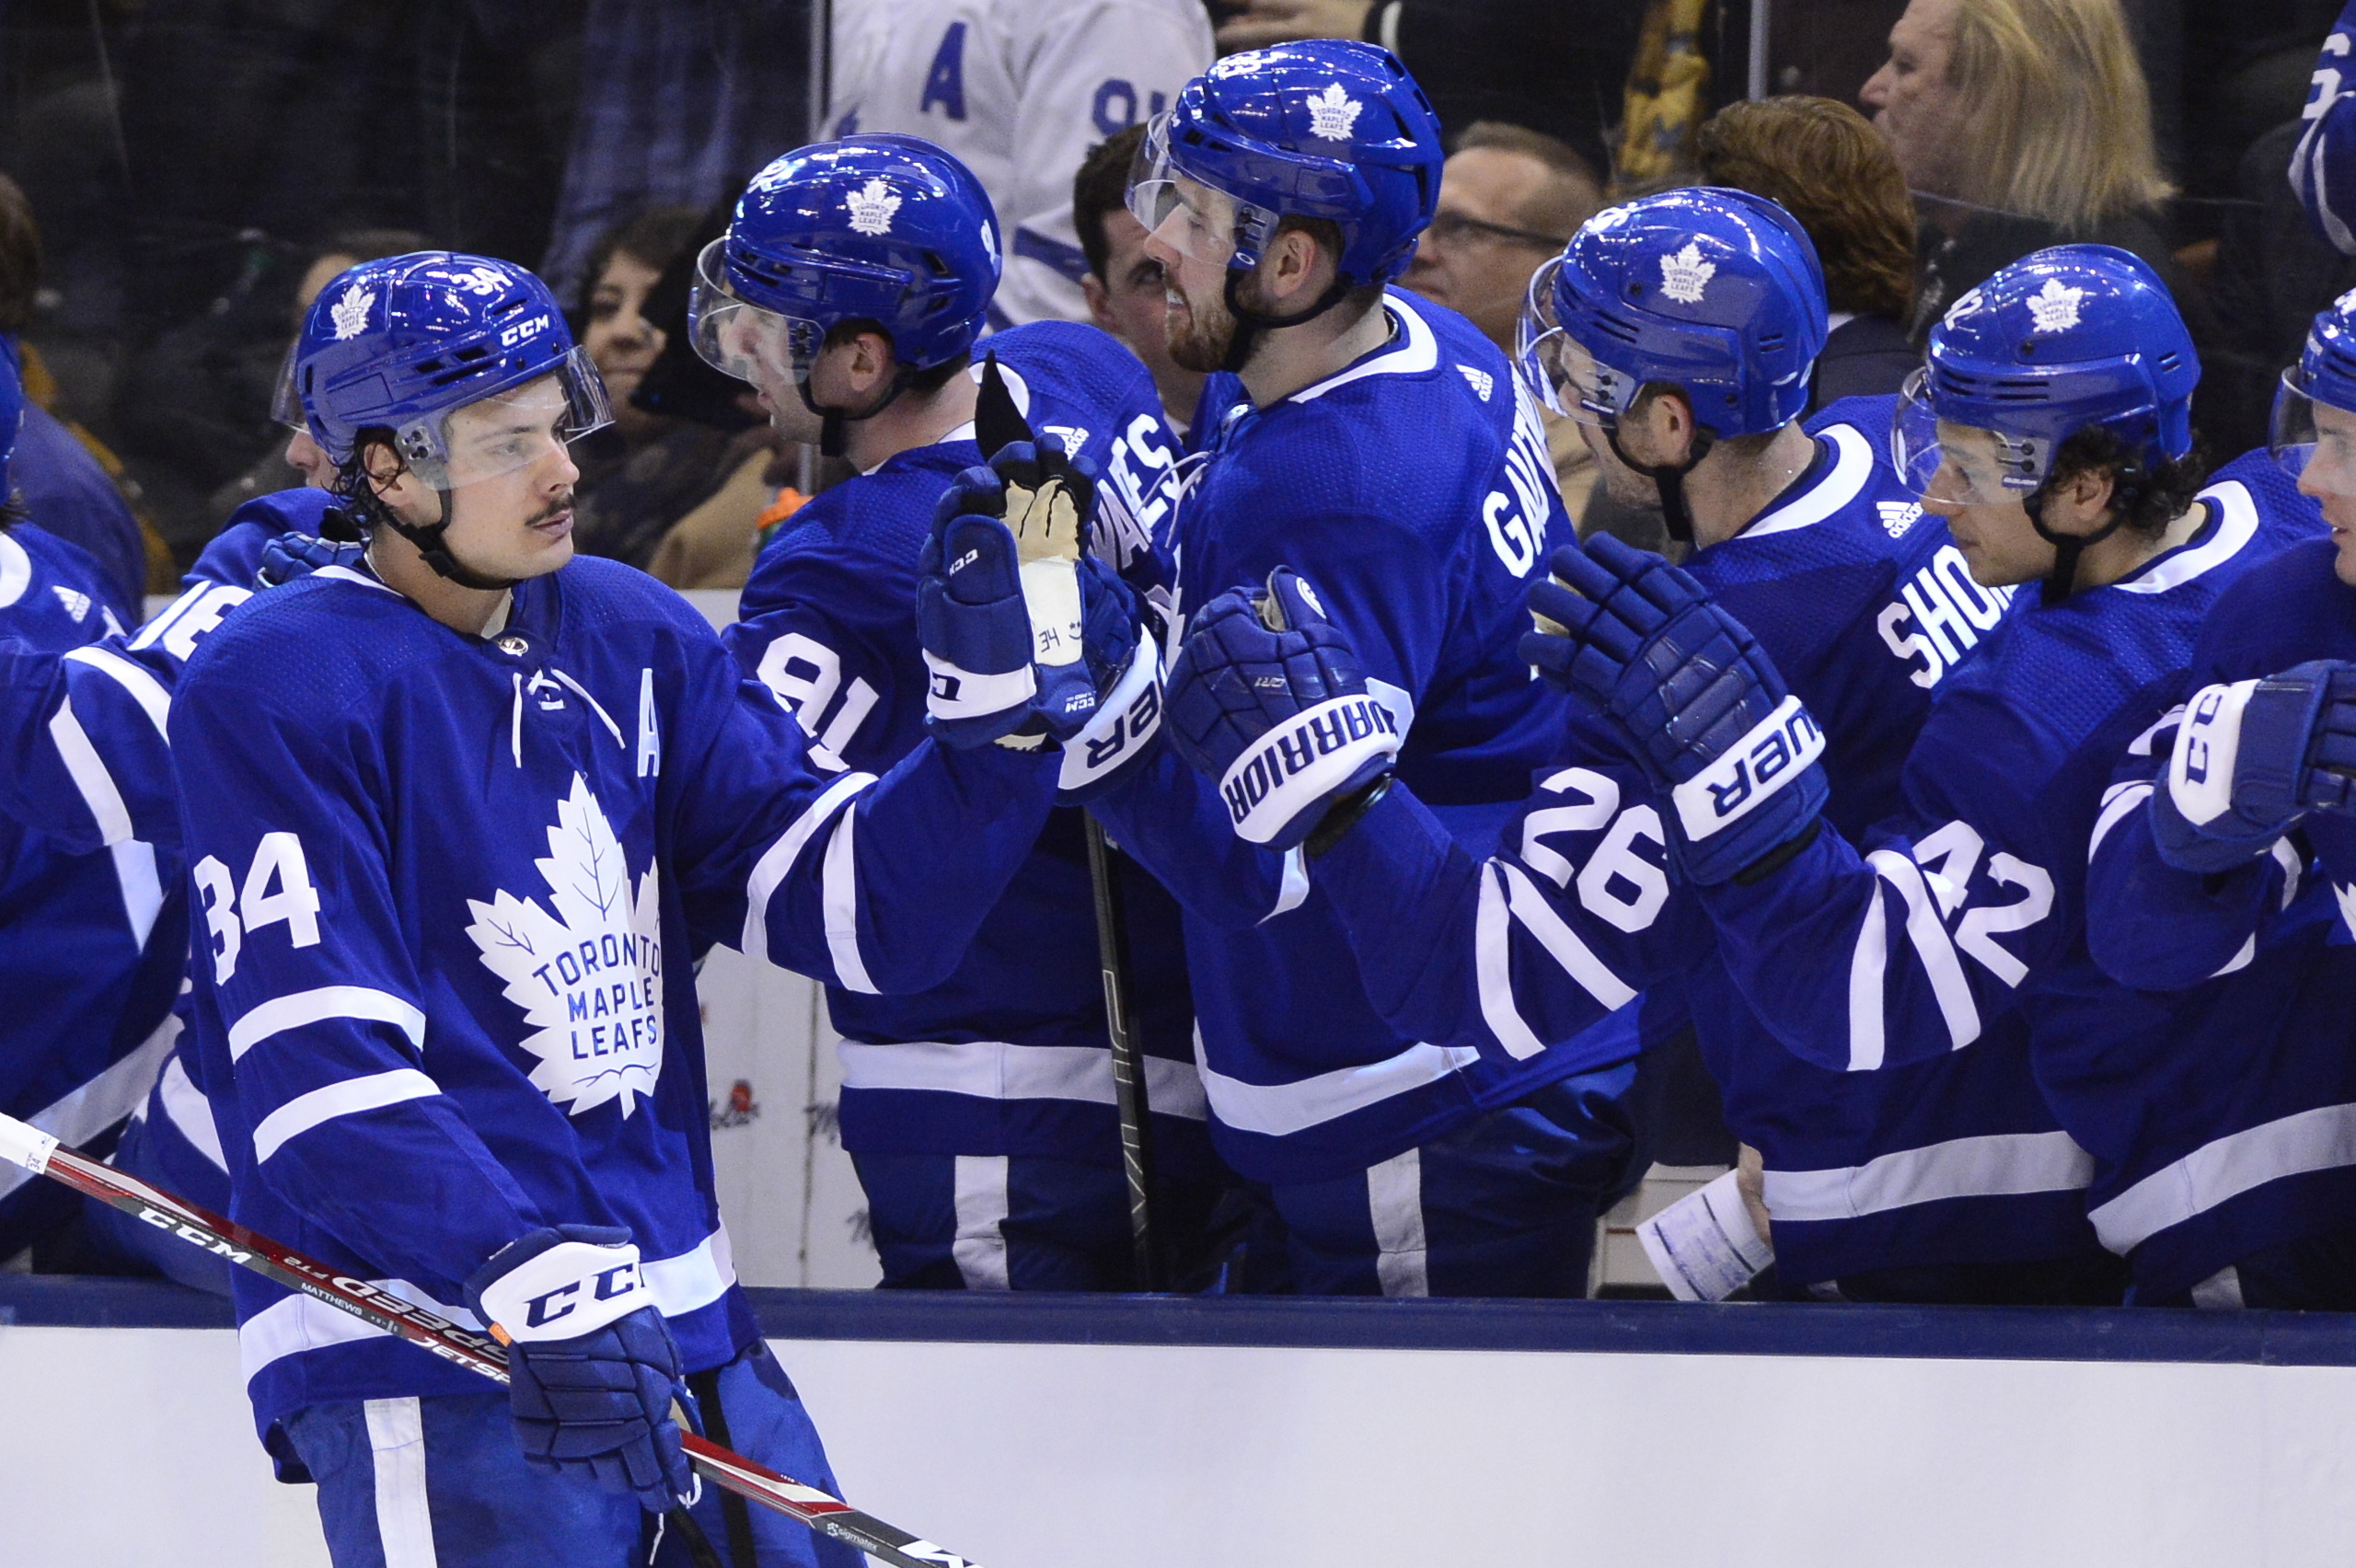 Disorderly conduct charge against Leafs’ Matthews dismissed